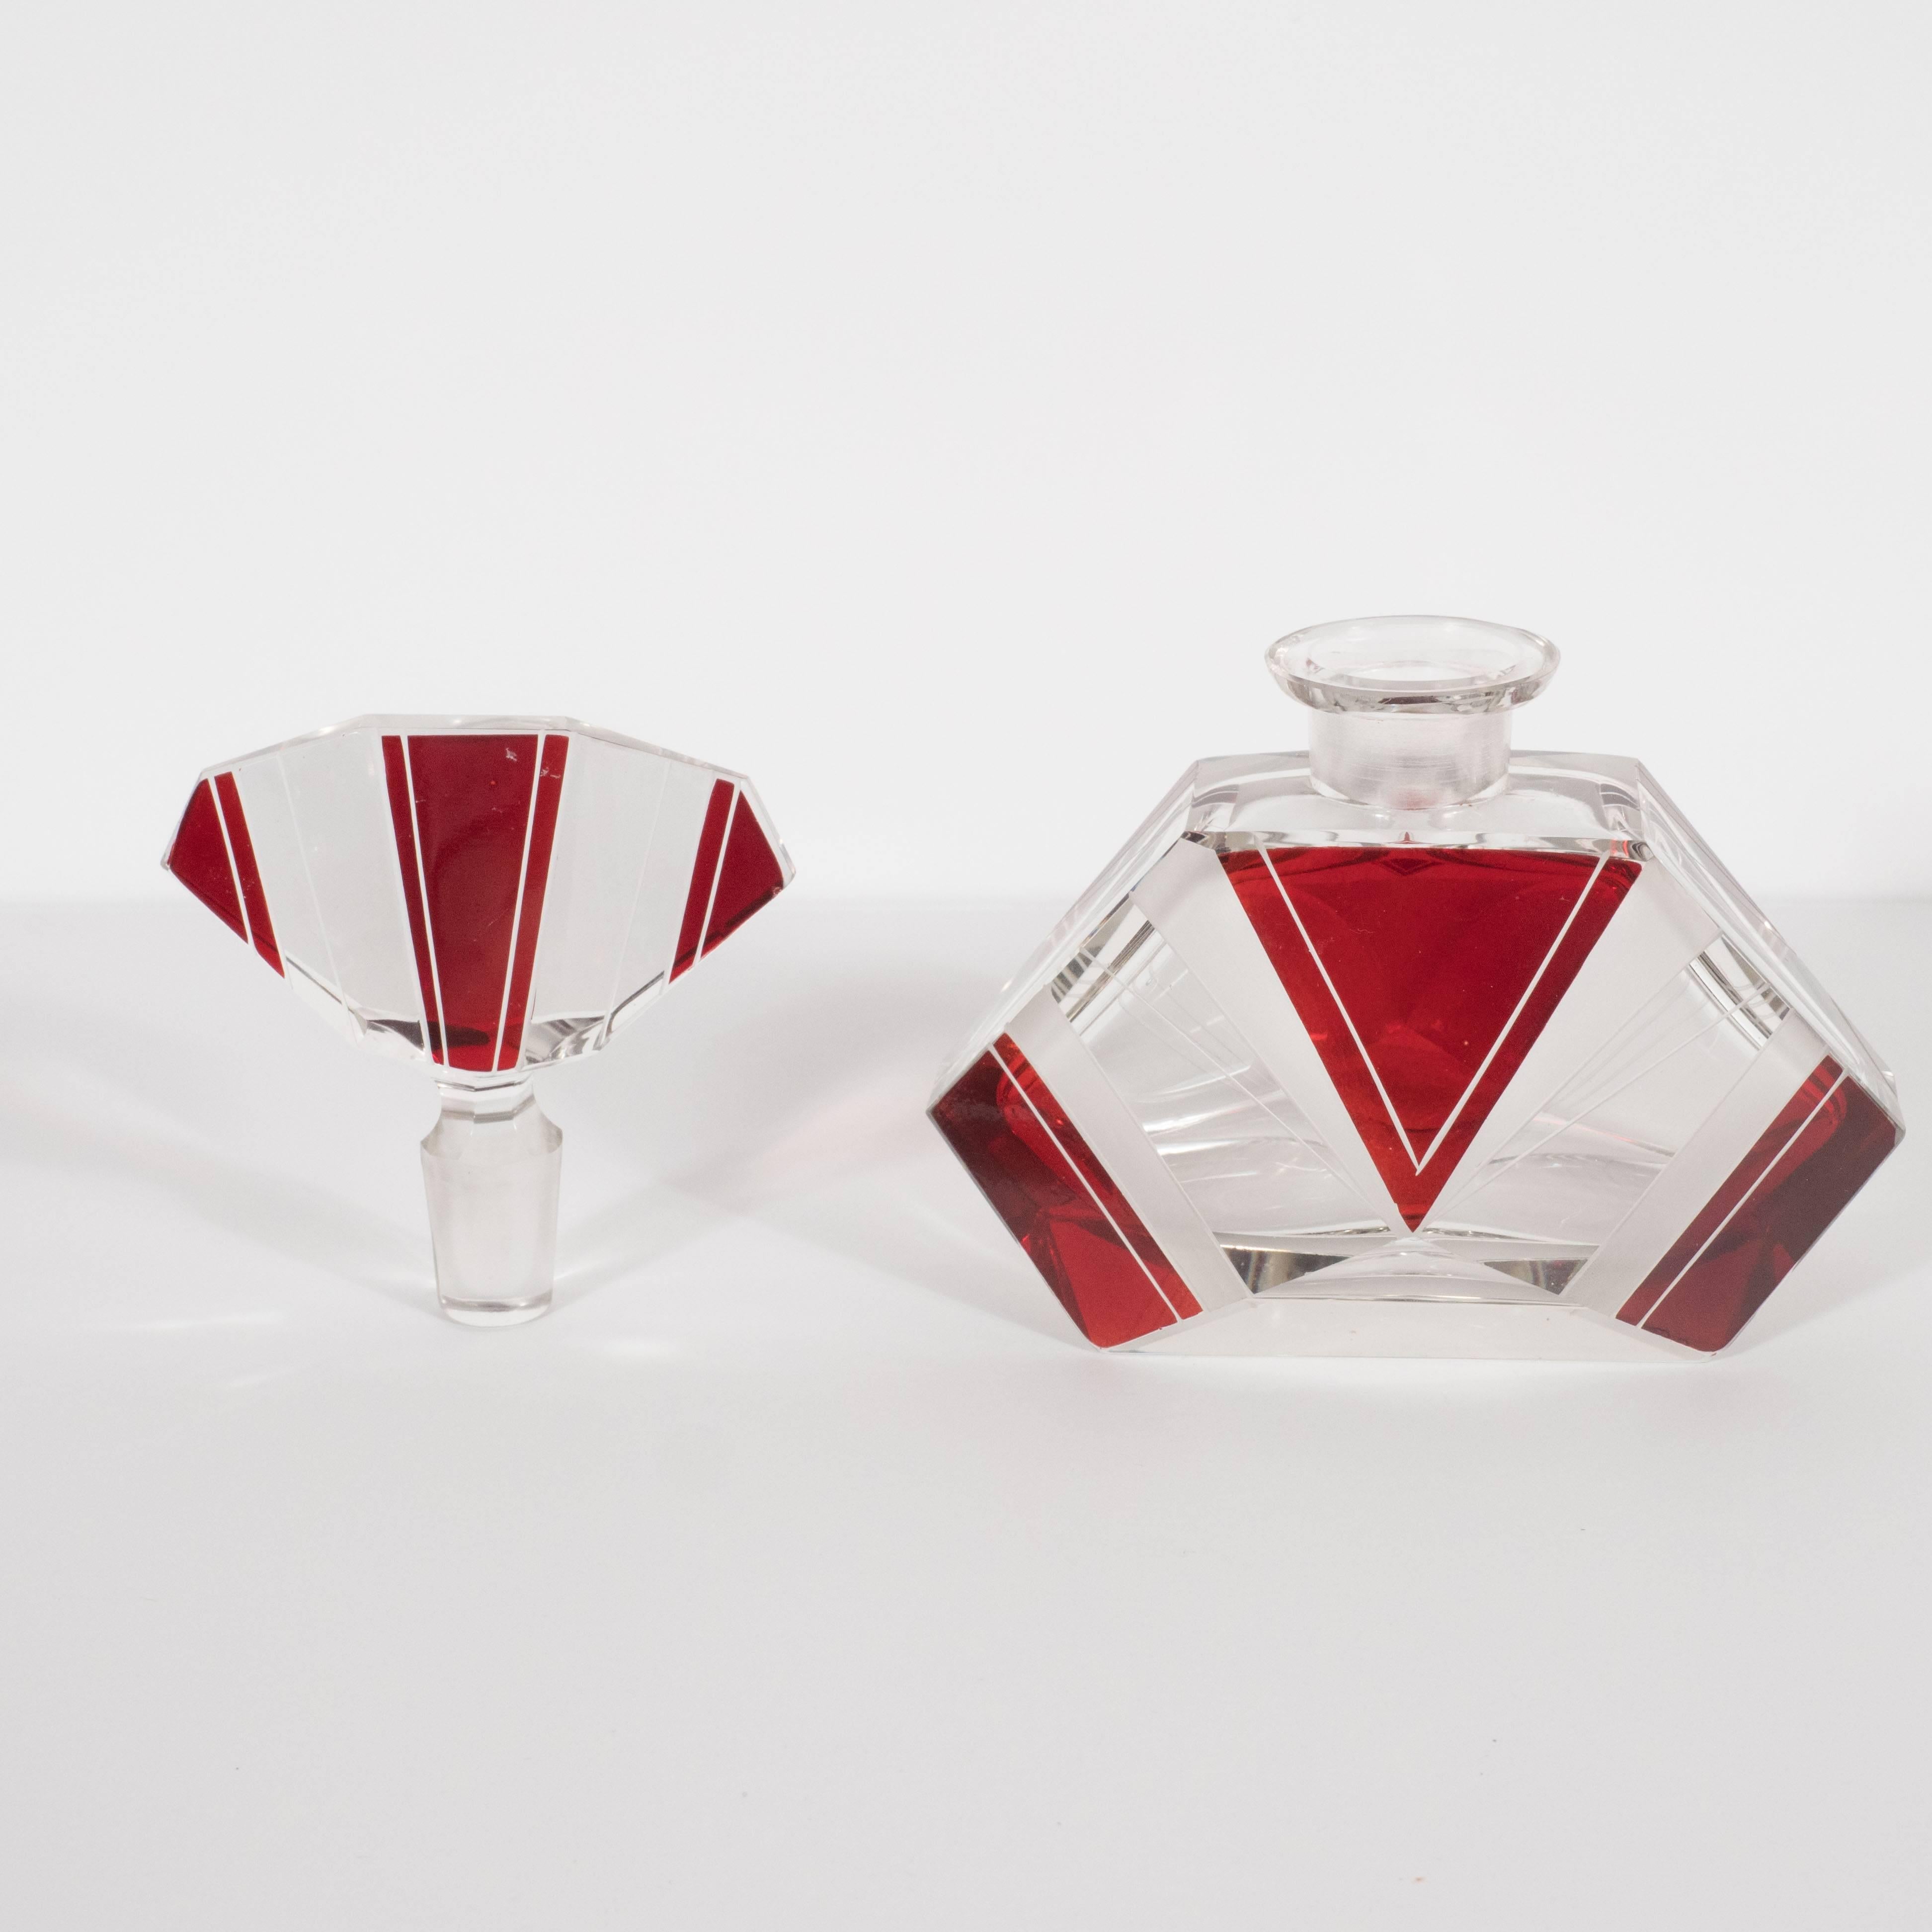 Czech Art Deco Perfume Bottle in Crimson and Clear Glass with Geometric Designs 2